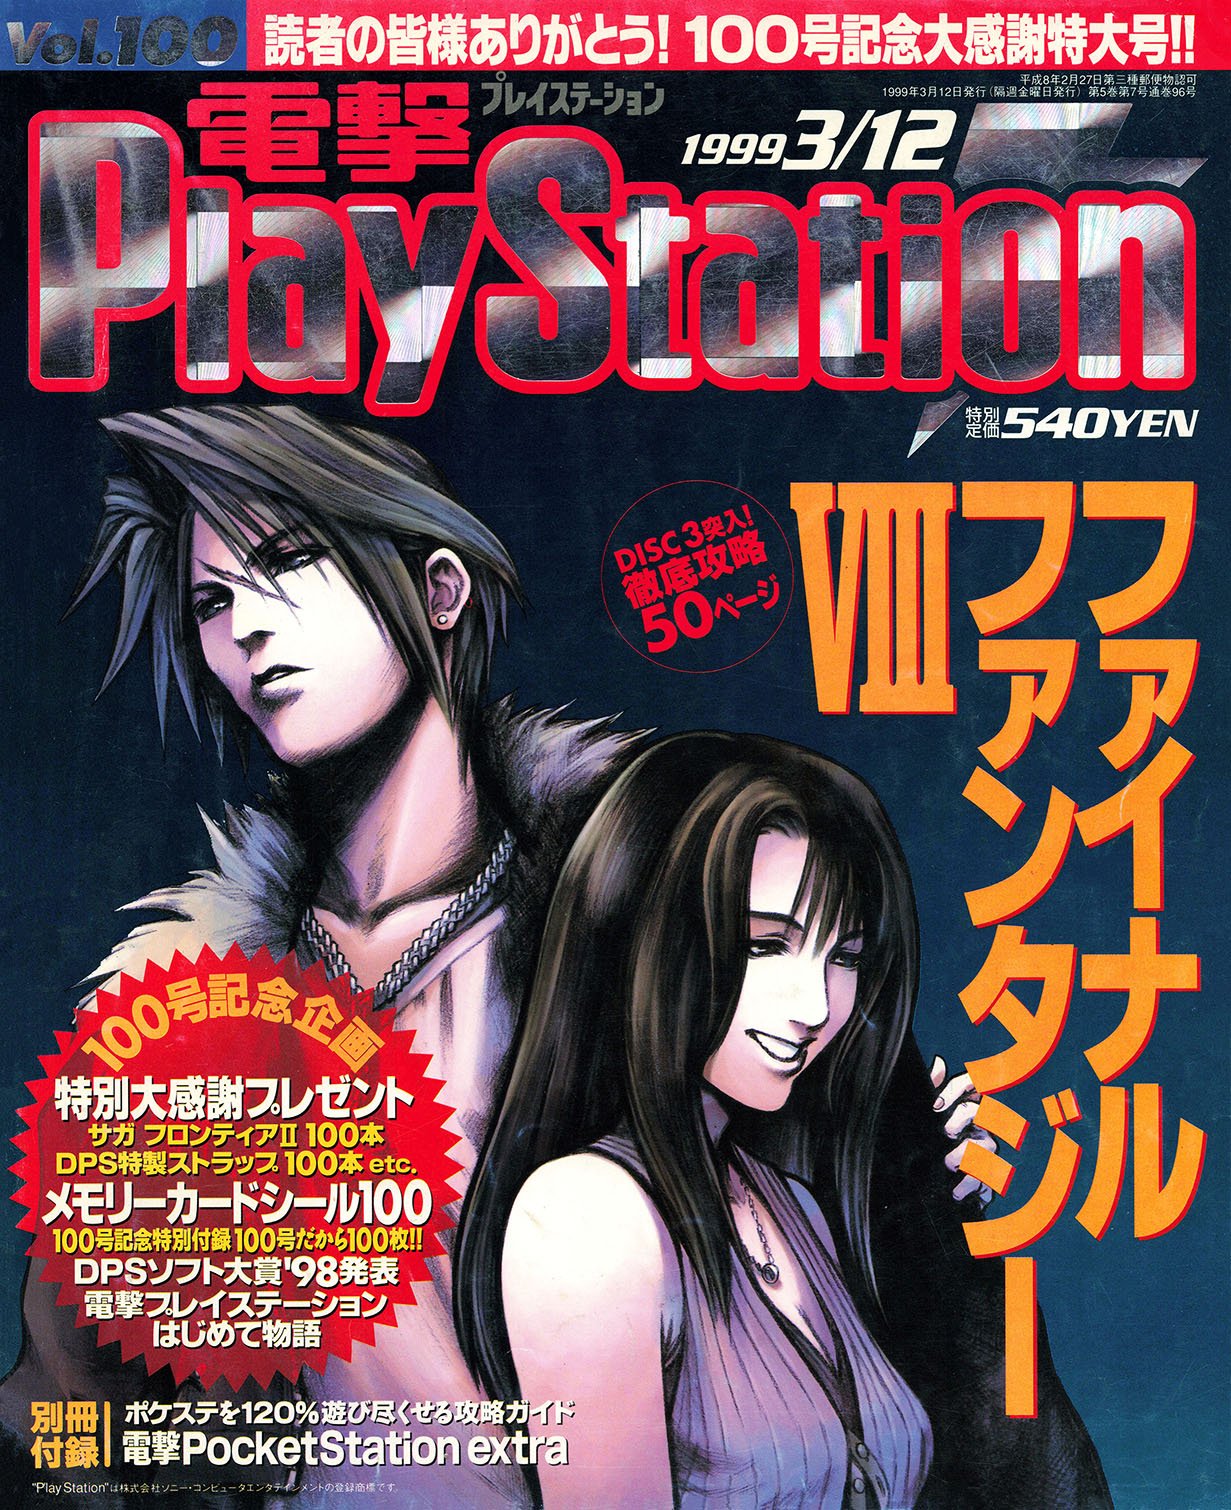 More information about "Dengeki PlayStation Vol.100 (March 12, 1999)"